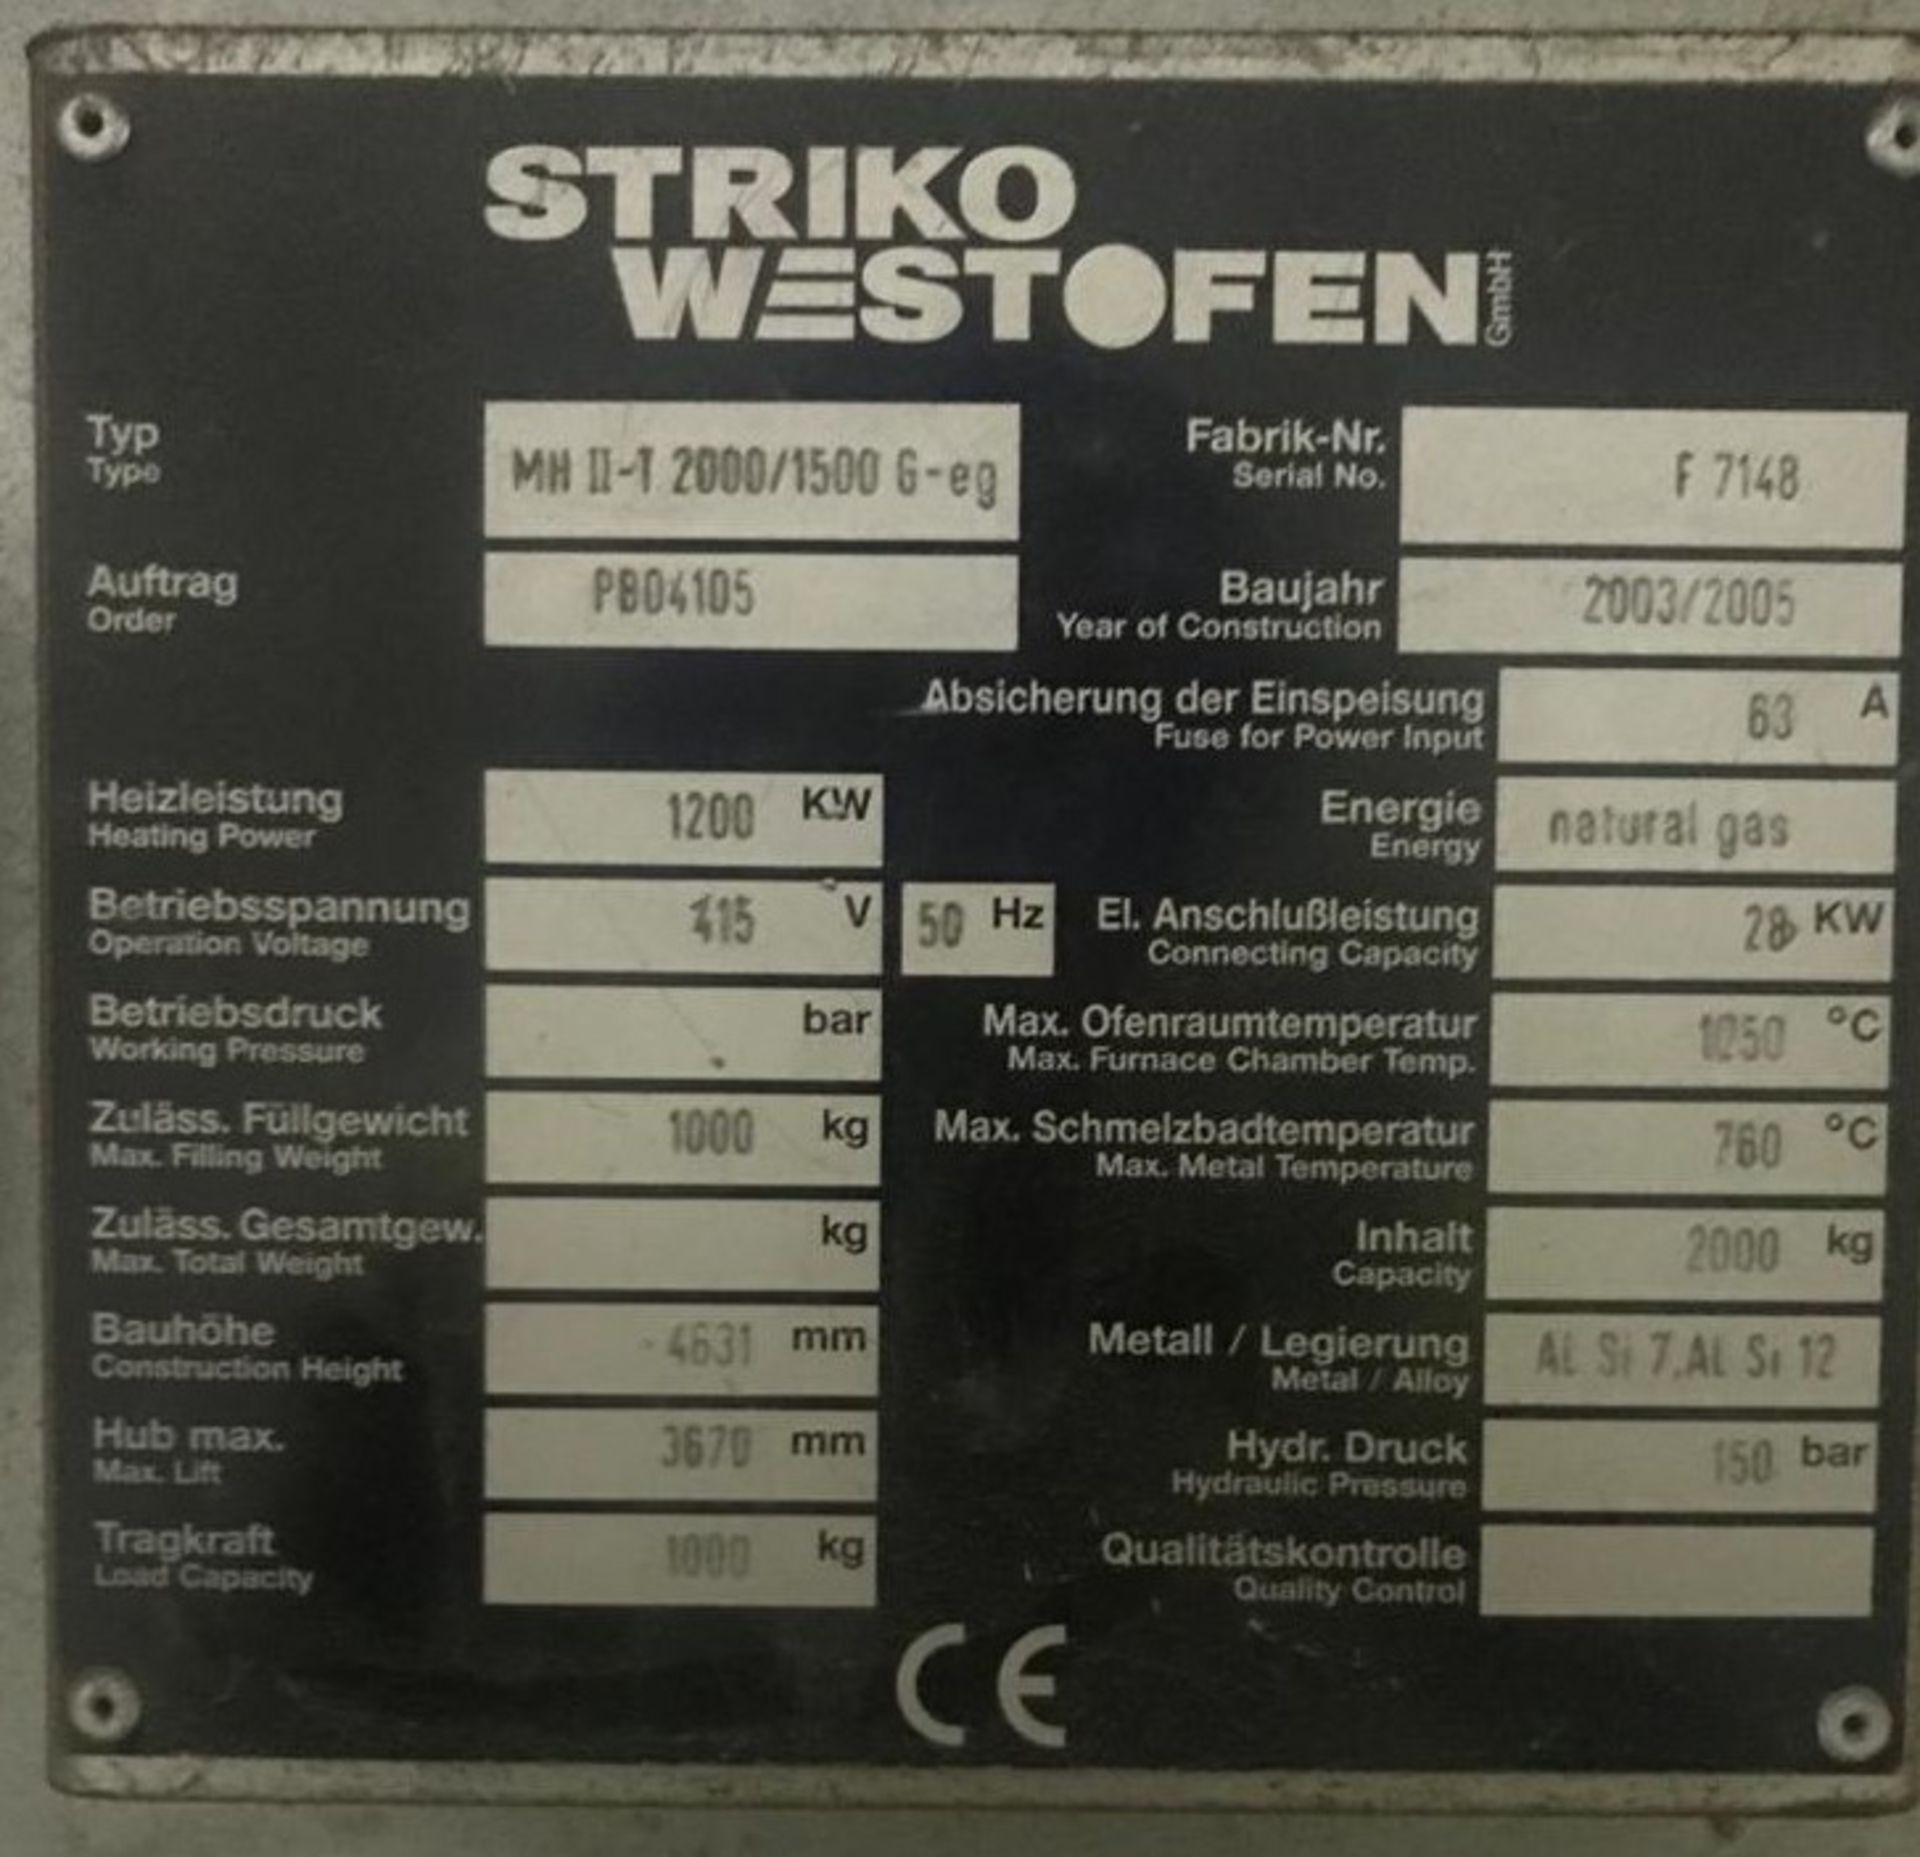 1 x Striko Westofen MH-II-T 2000/15000 G-eg Melting and Holding Furnace - CL547 - Location: South - Image 4 of 4